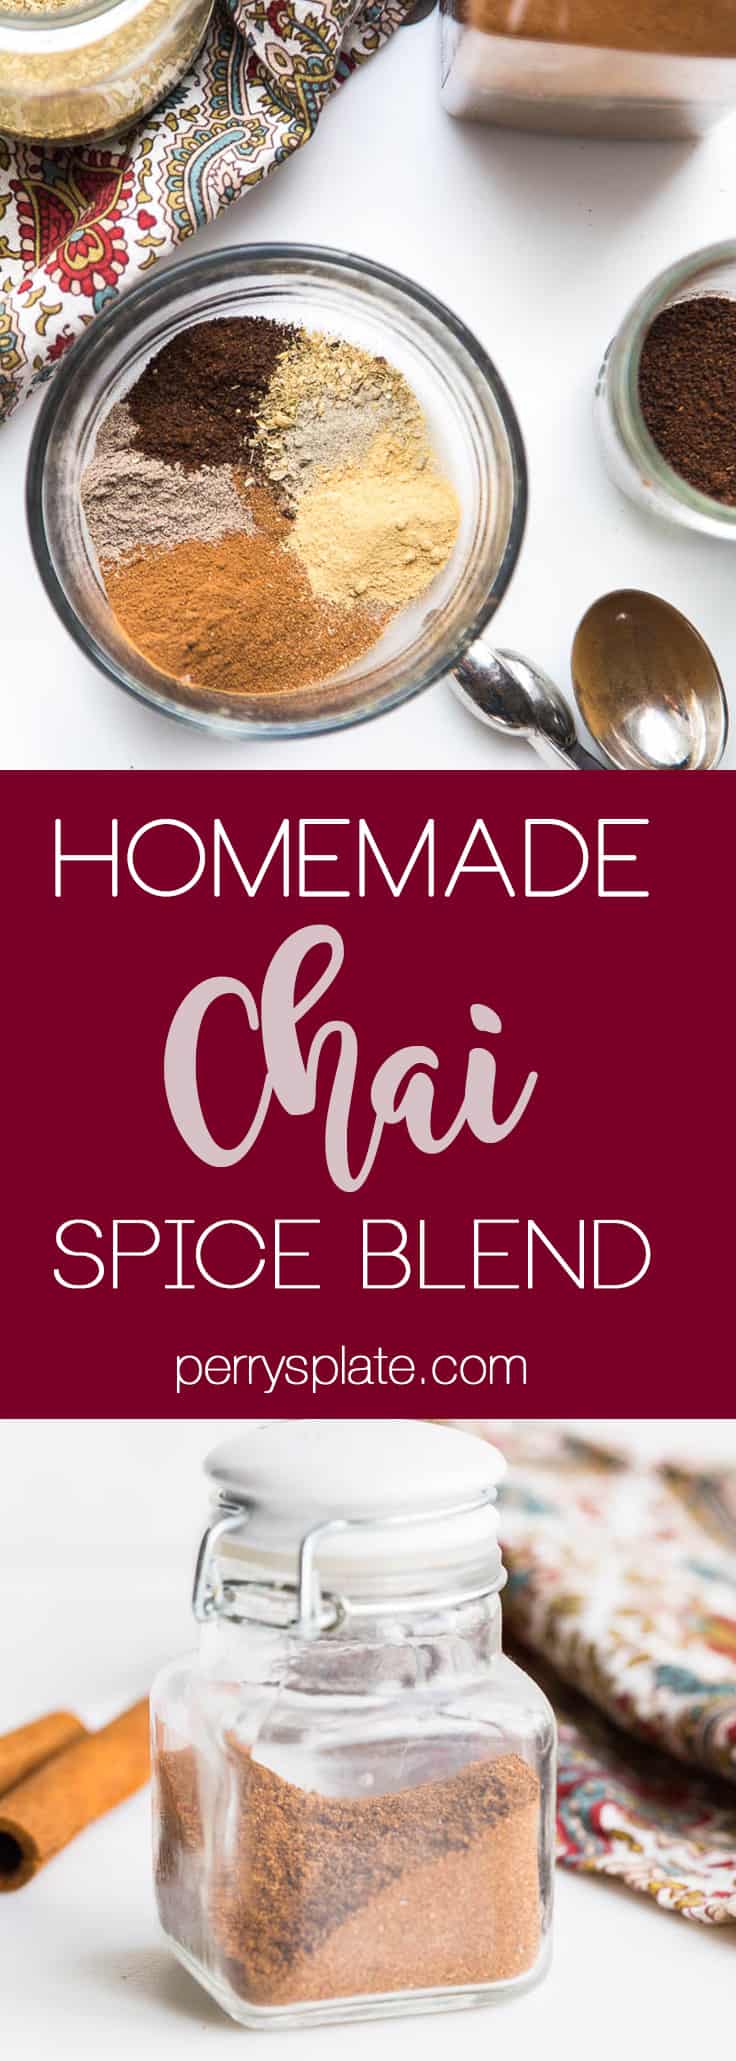 Homemade Chai Spice Blend - Perry's Plate